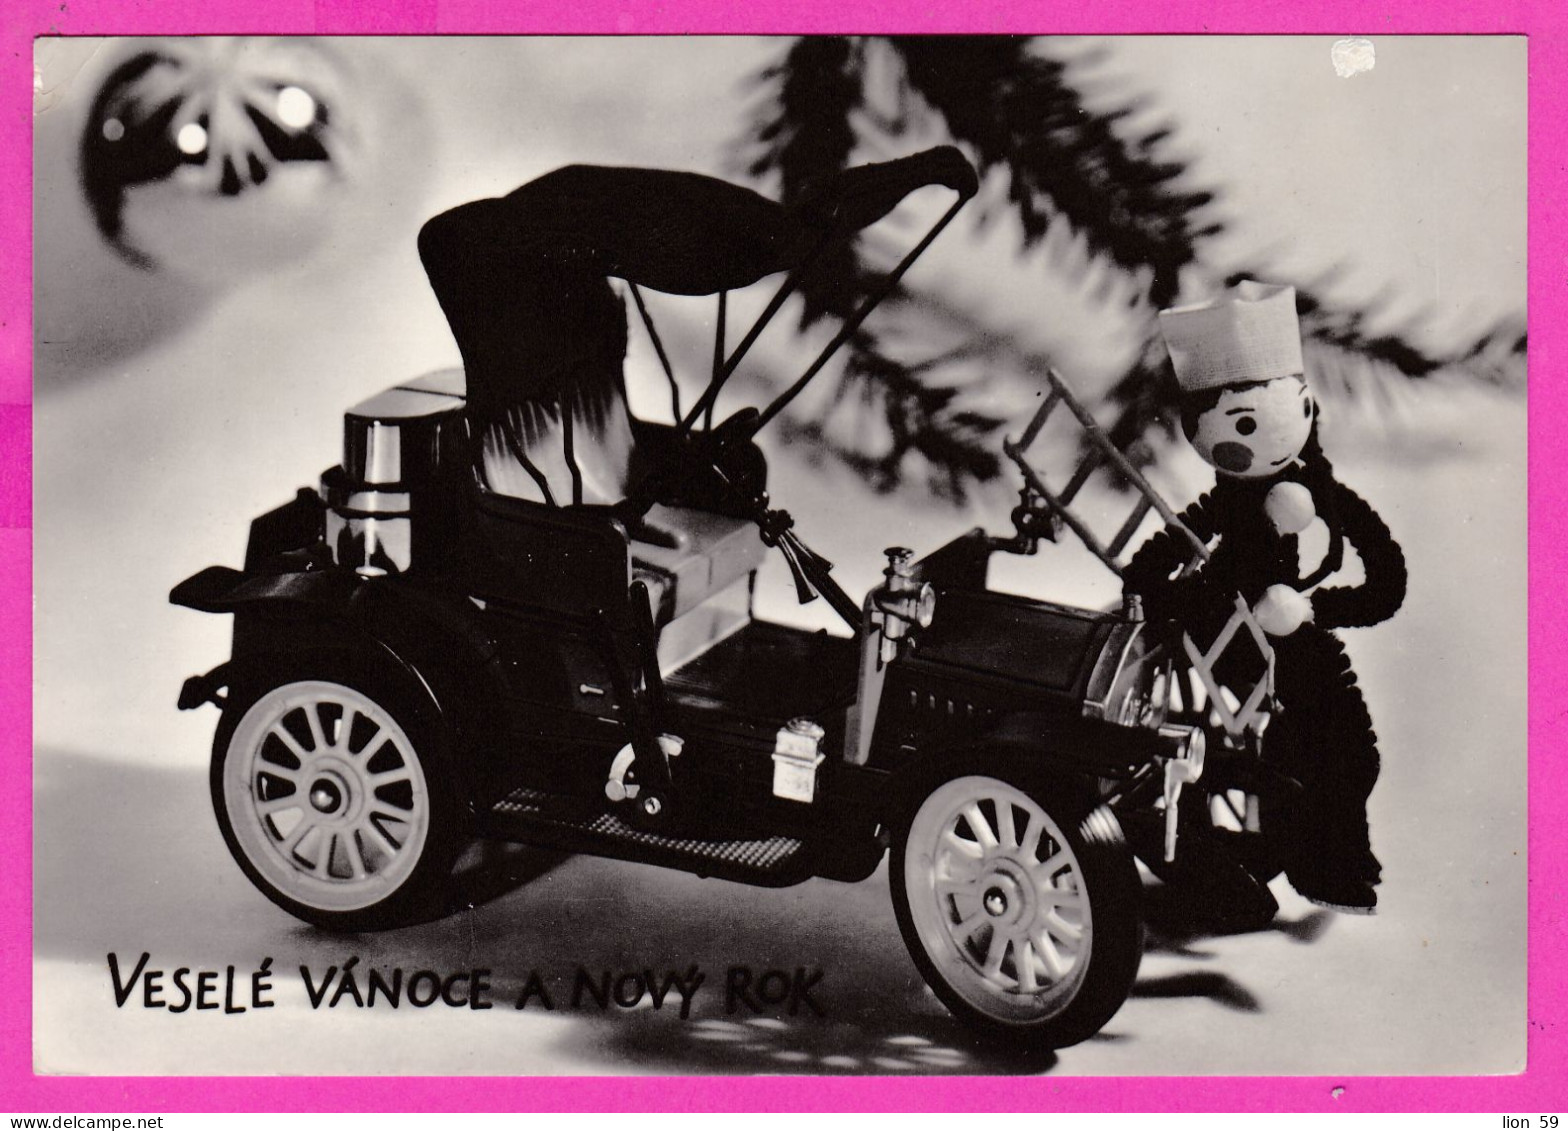 294599 / Czechoslovakia - Doll Car Chimney Sweeper PC 1970 USED 30h Thirty Years War Cannon And Baron Munchausen - Storia Postale